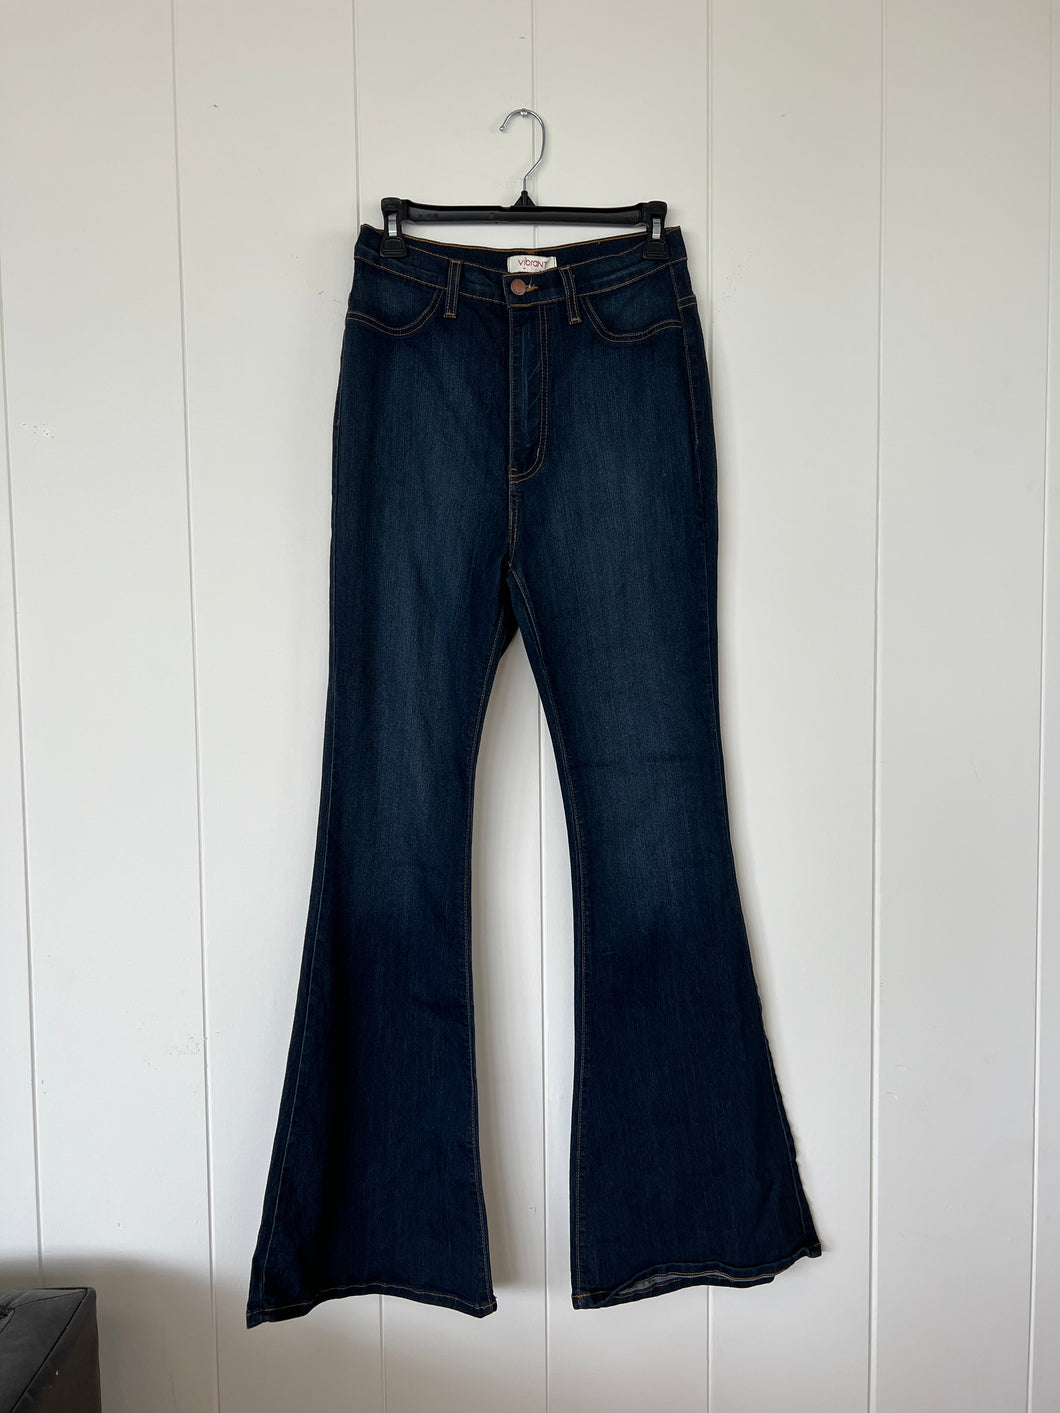 Bell Bottoms - size 30